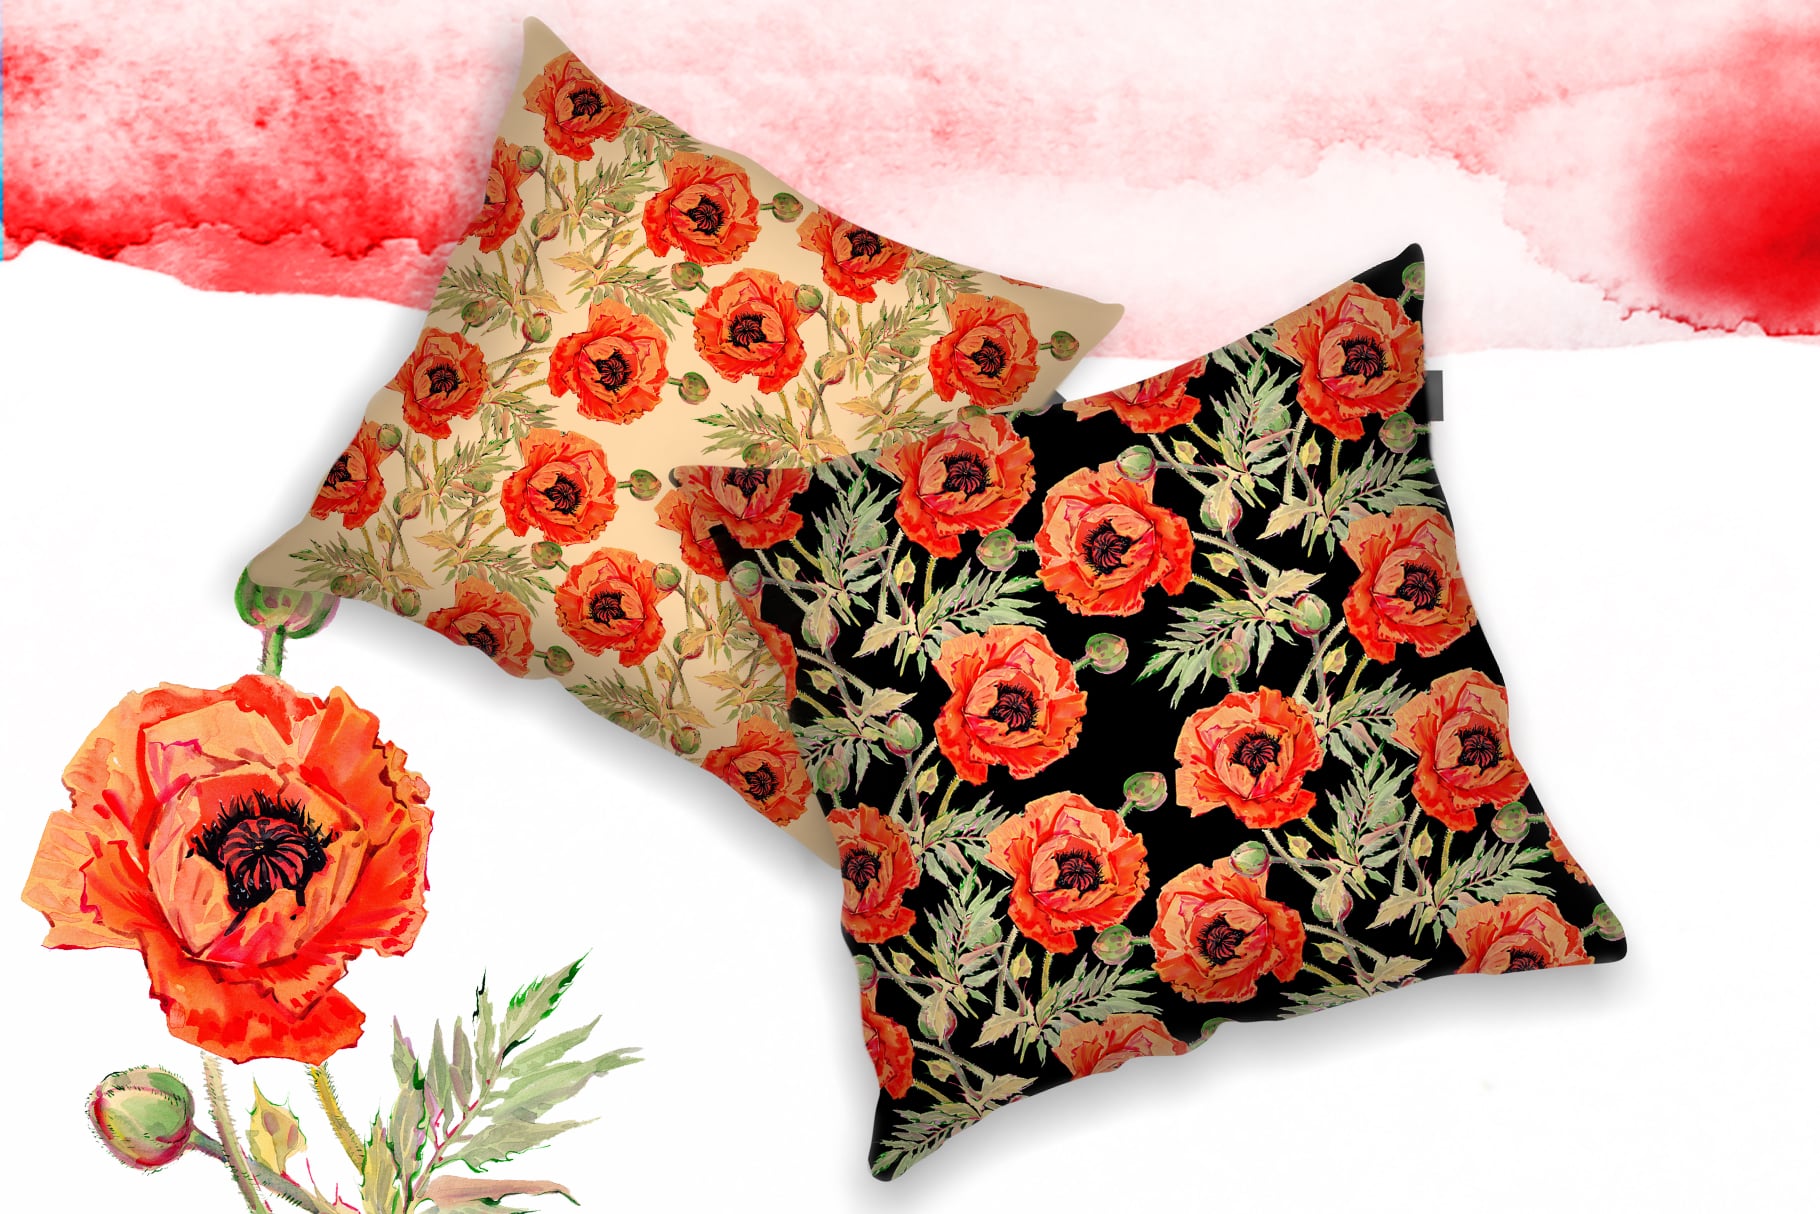 Two decorate pillows with red poppies.